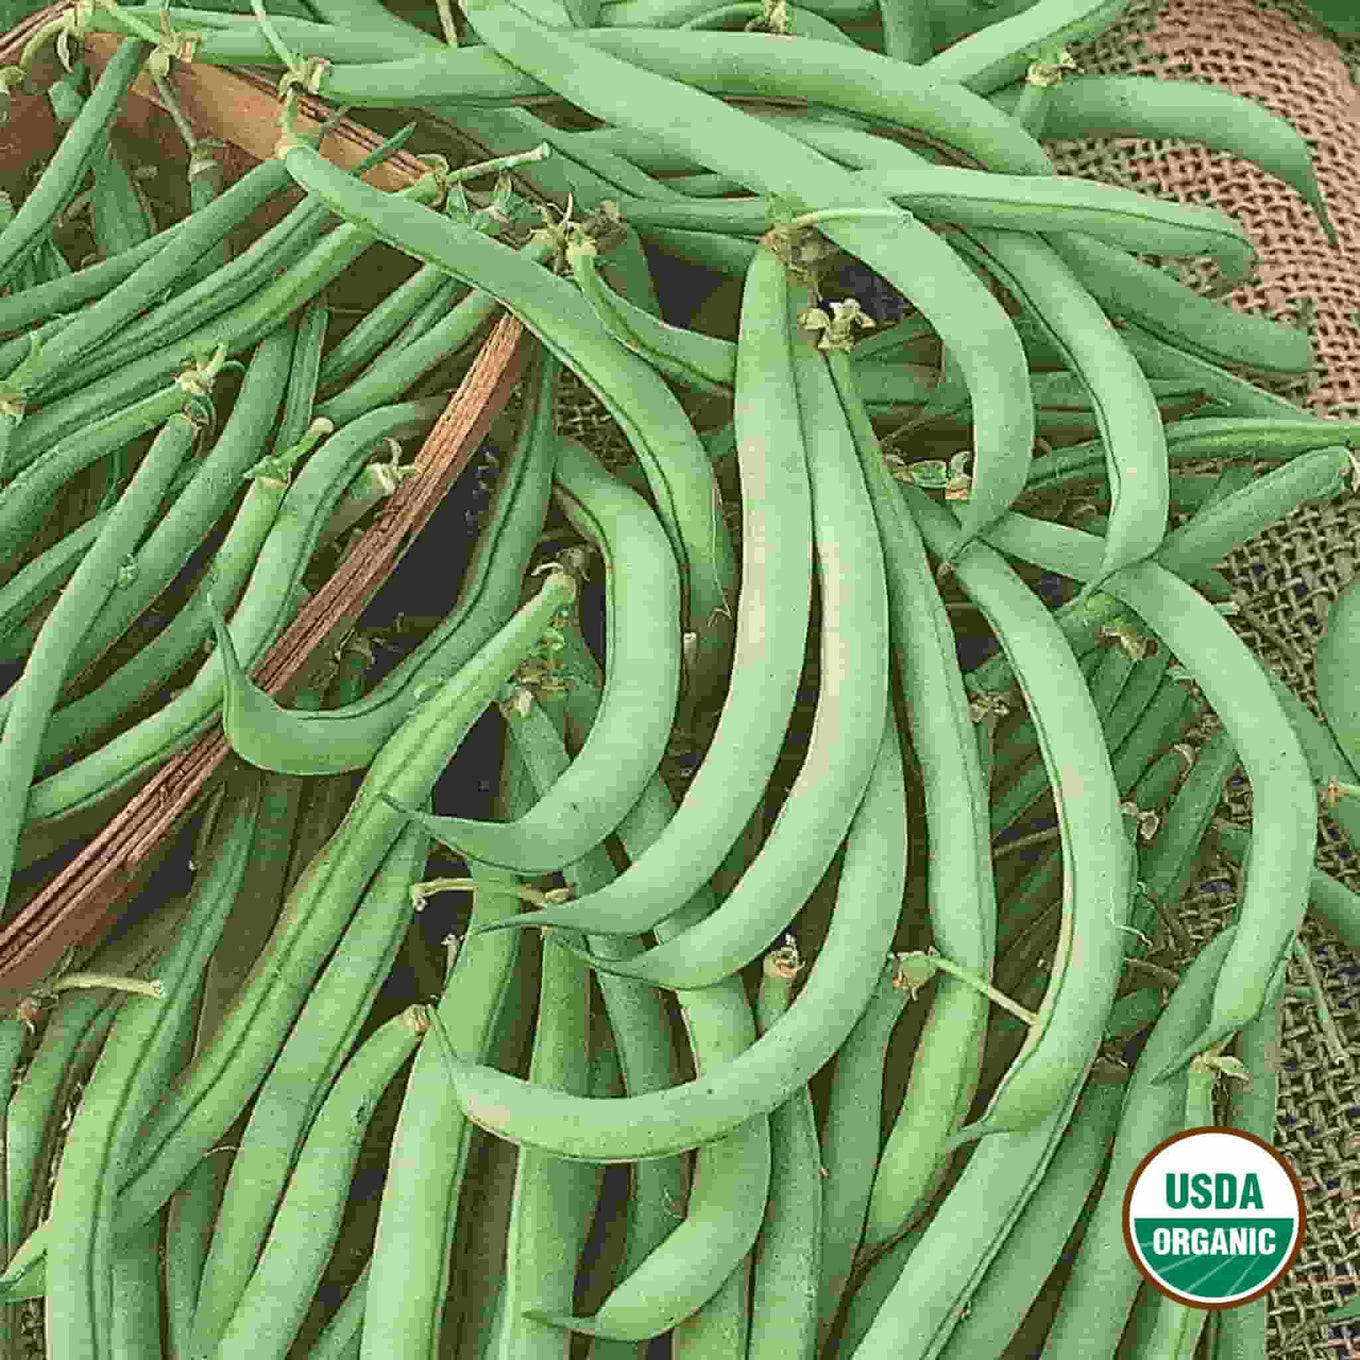 Tendergreen Improved Organic Bush Bean seeds fully matured and harvested, sitting in a wicker basket.